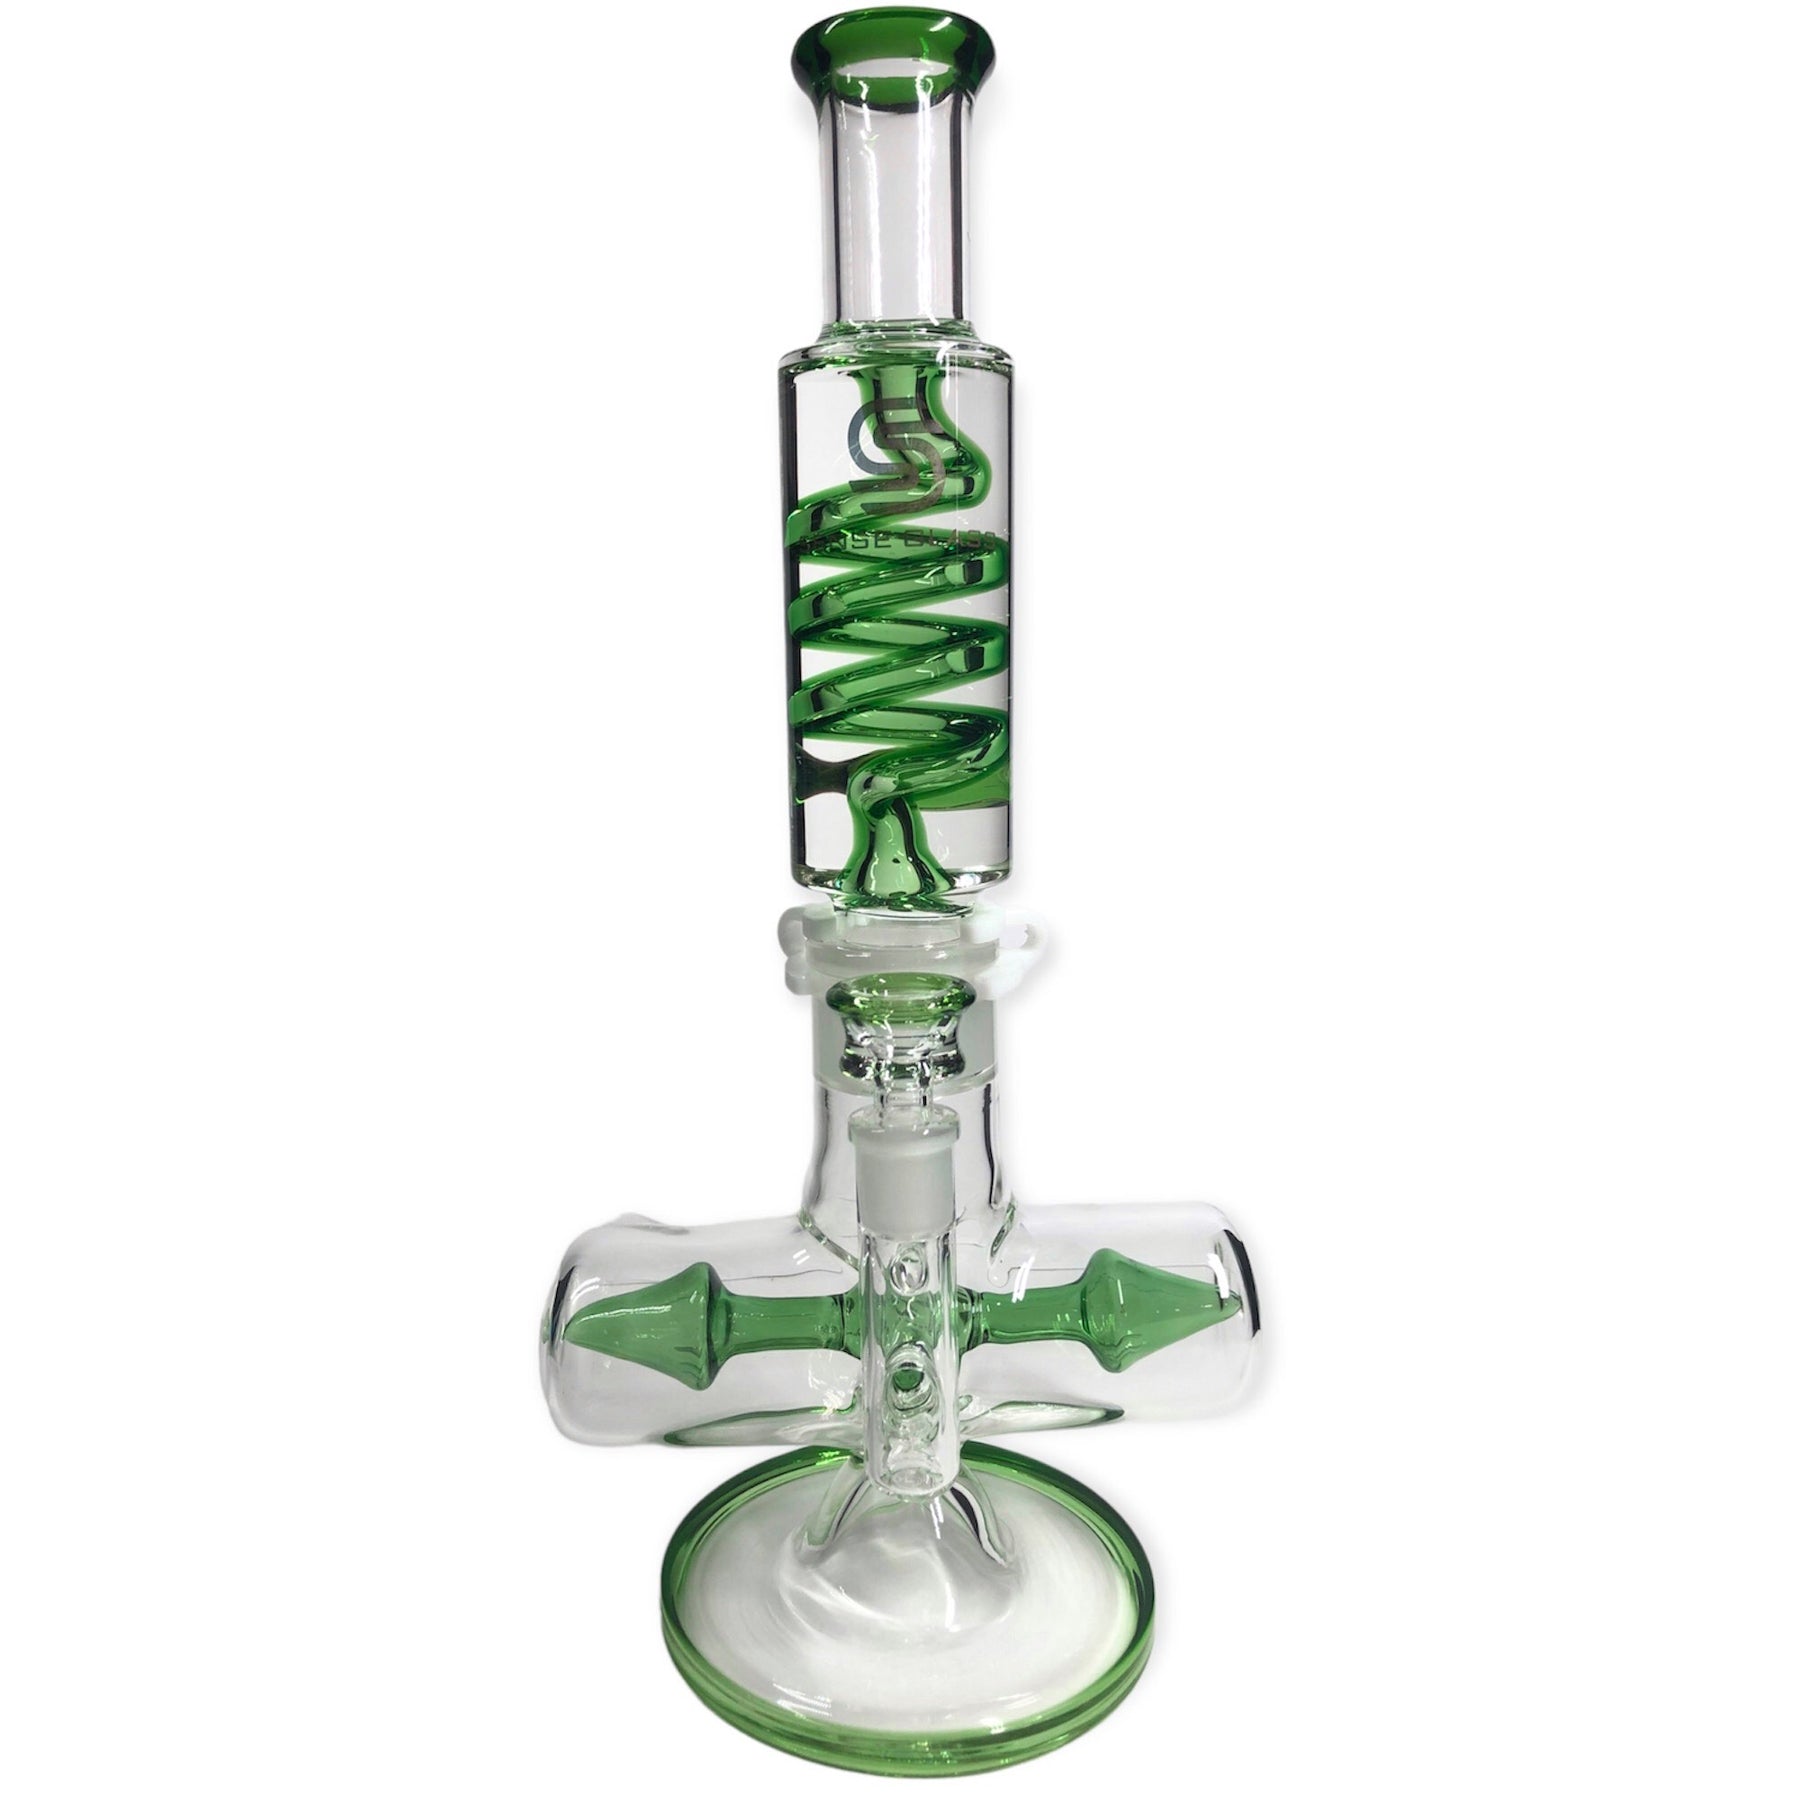 Freezable Glycerin Coil Bong with Inline Percolator by Sense Glass - Golden Leaf Shop